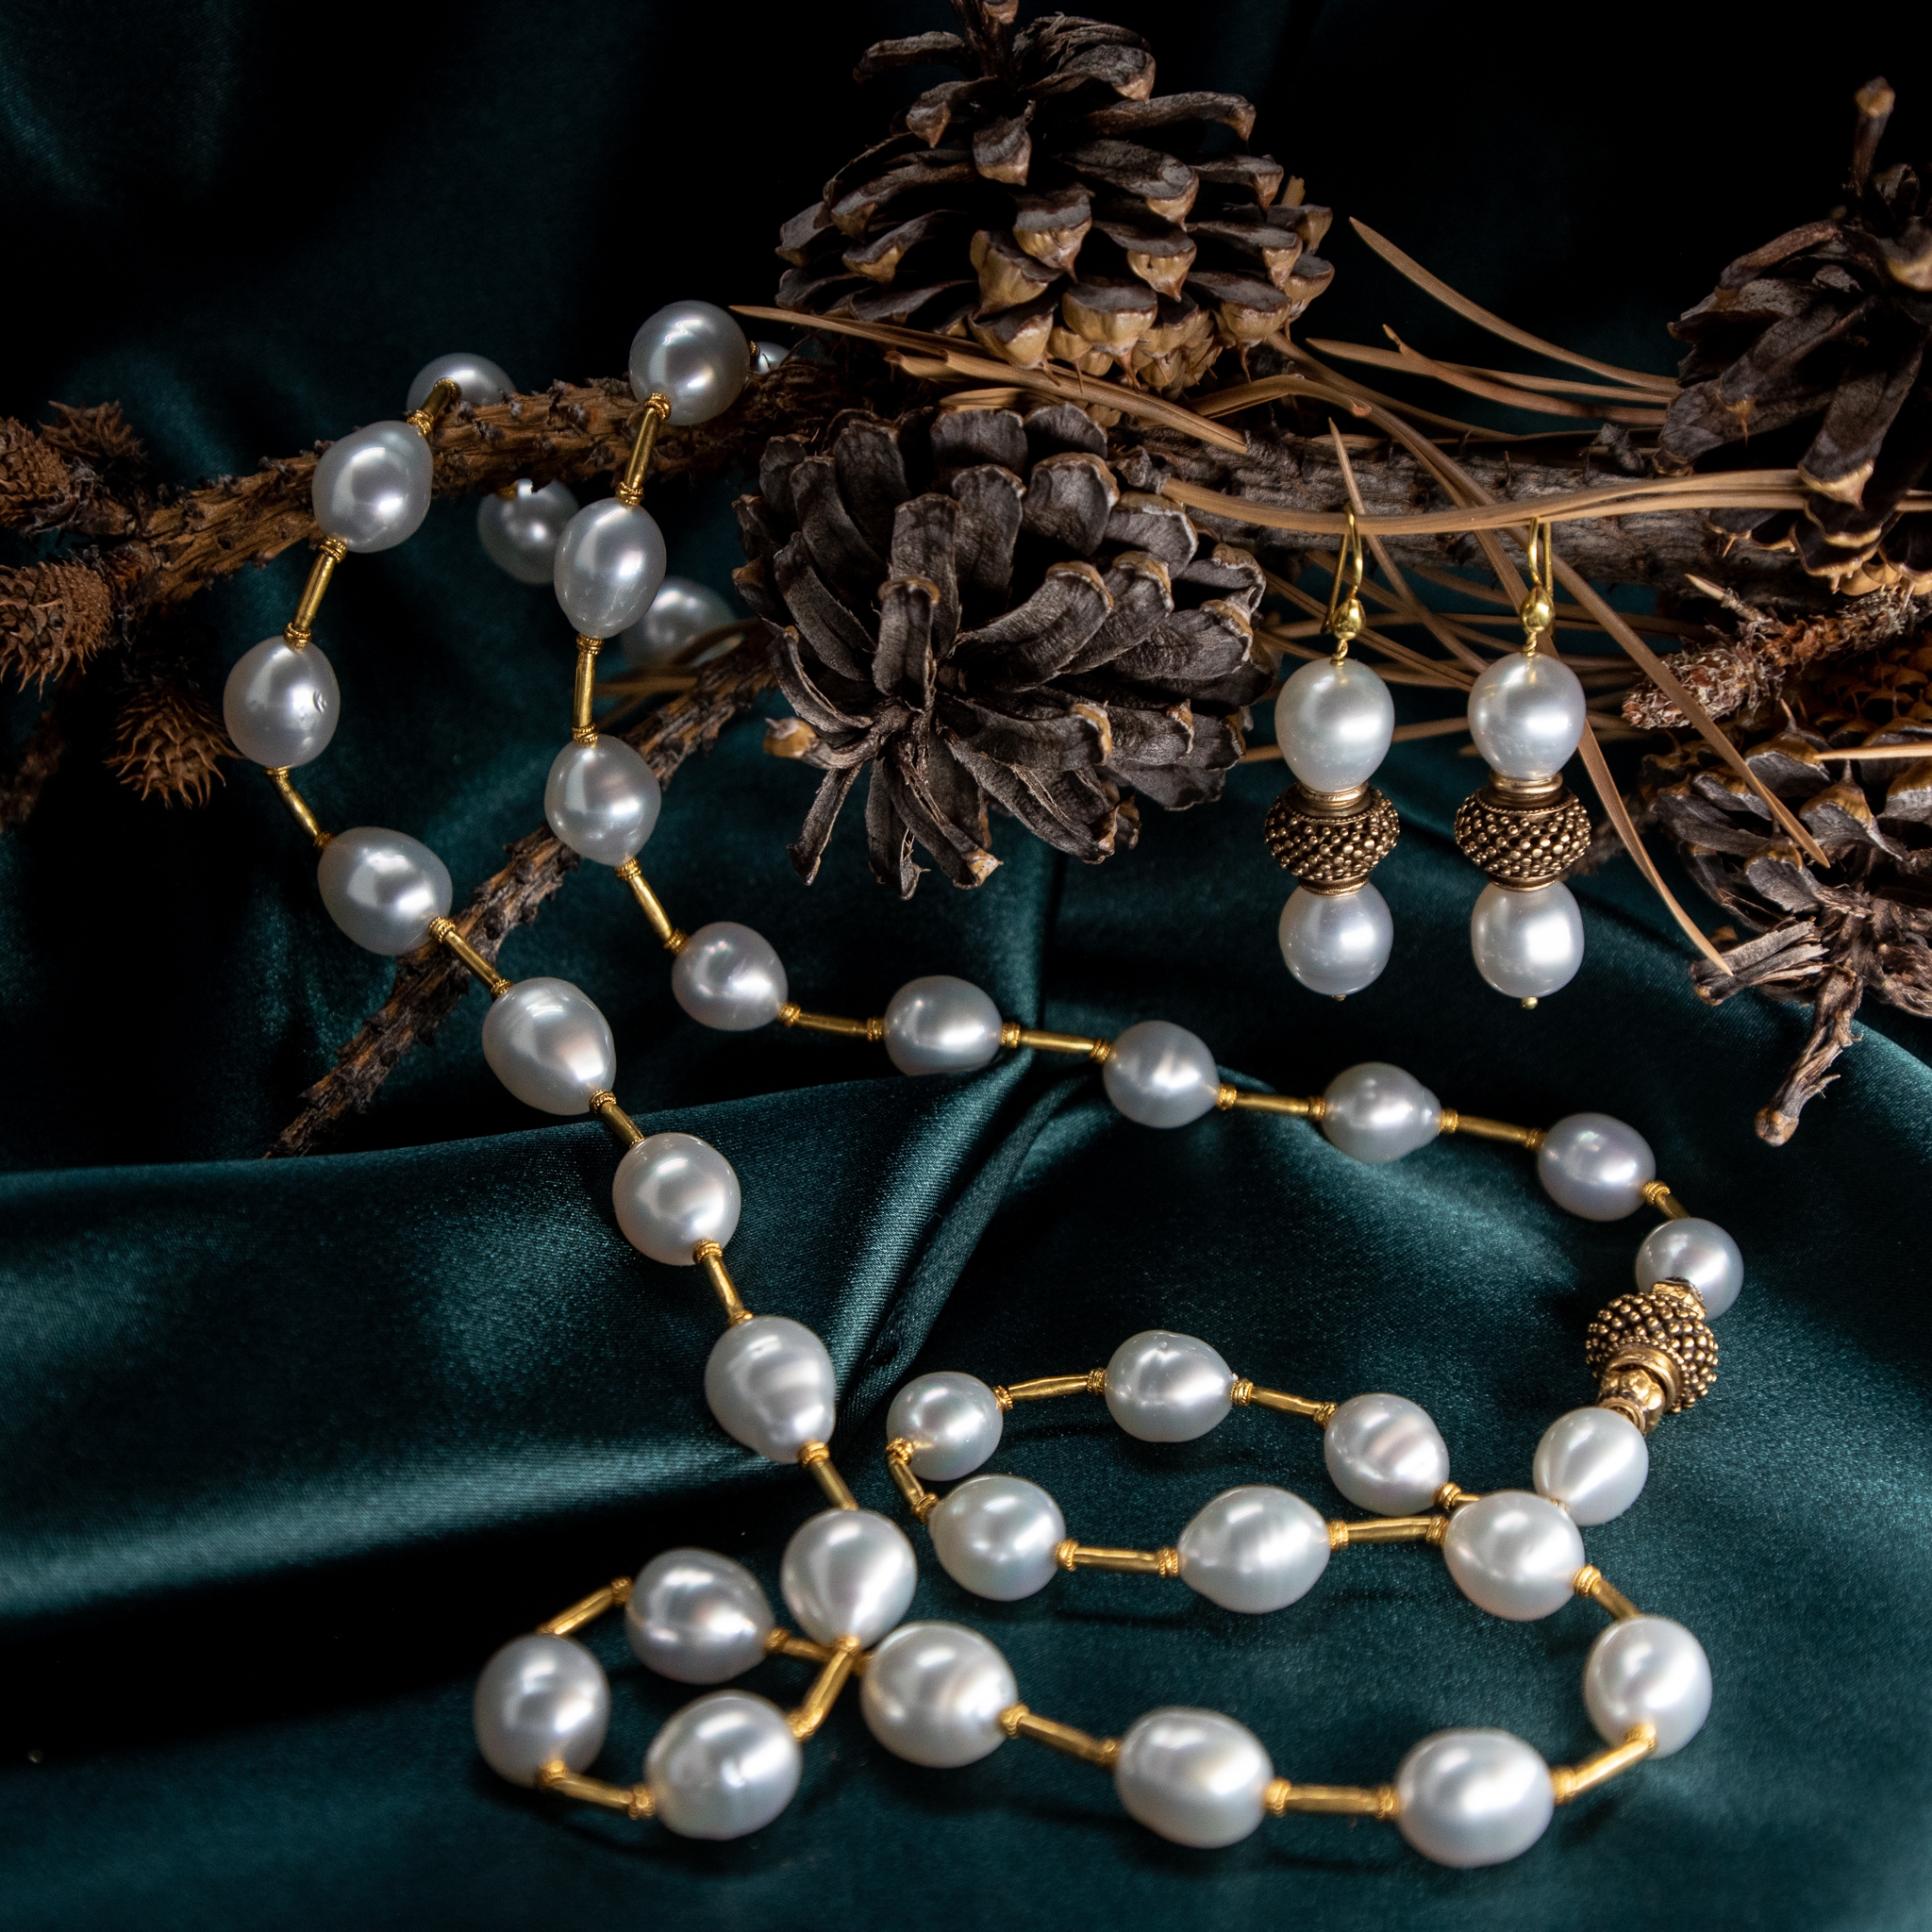 South Sea Pearls necklace with 18K gold spacers photographed on dark green silk with pinecones